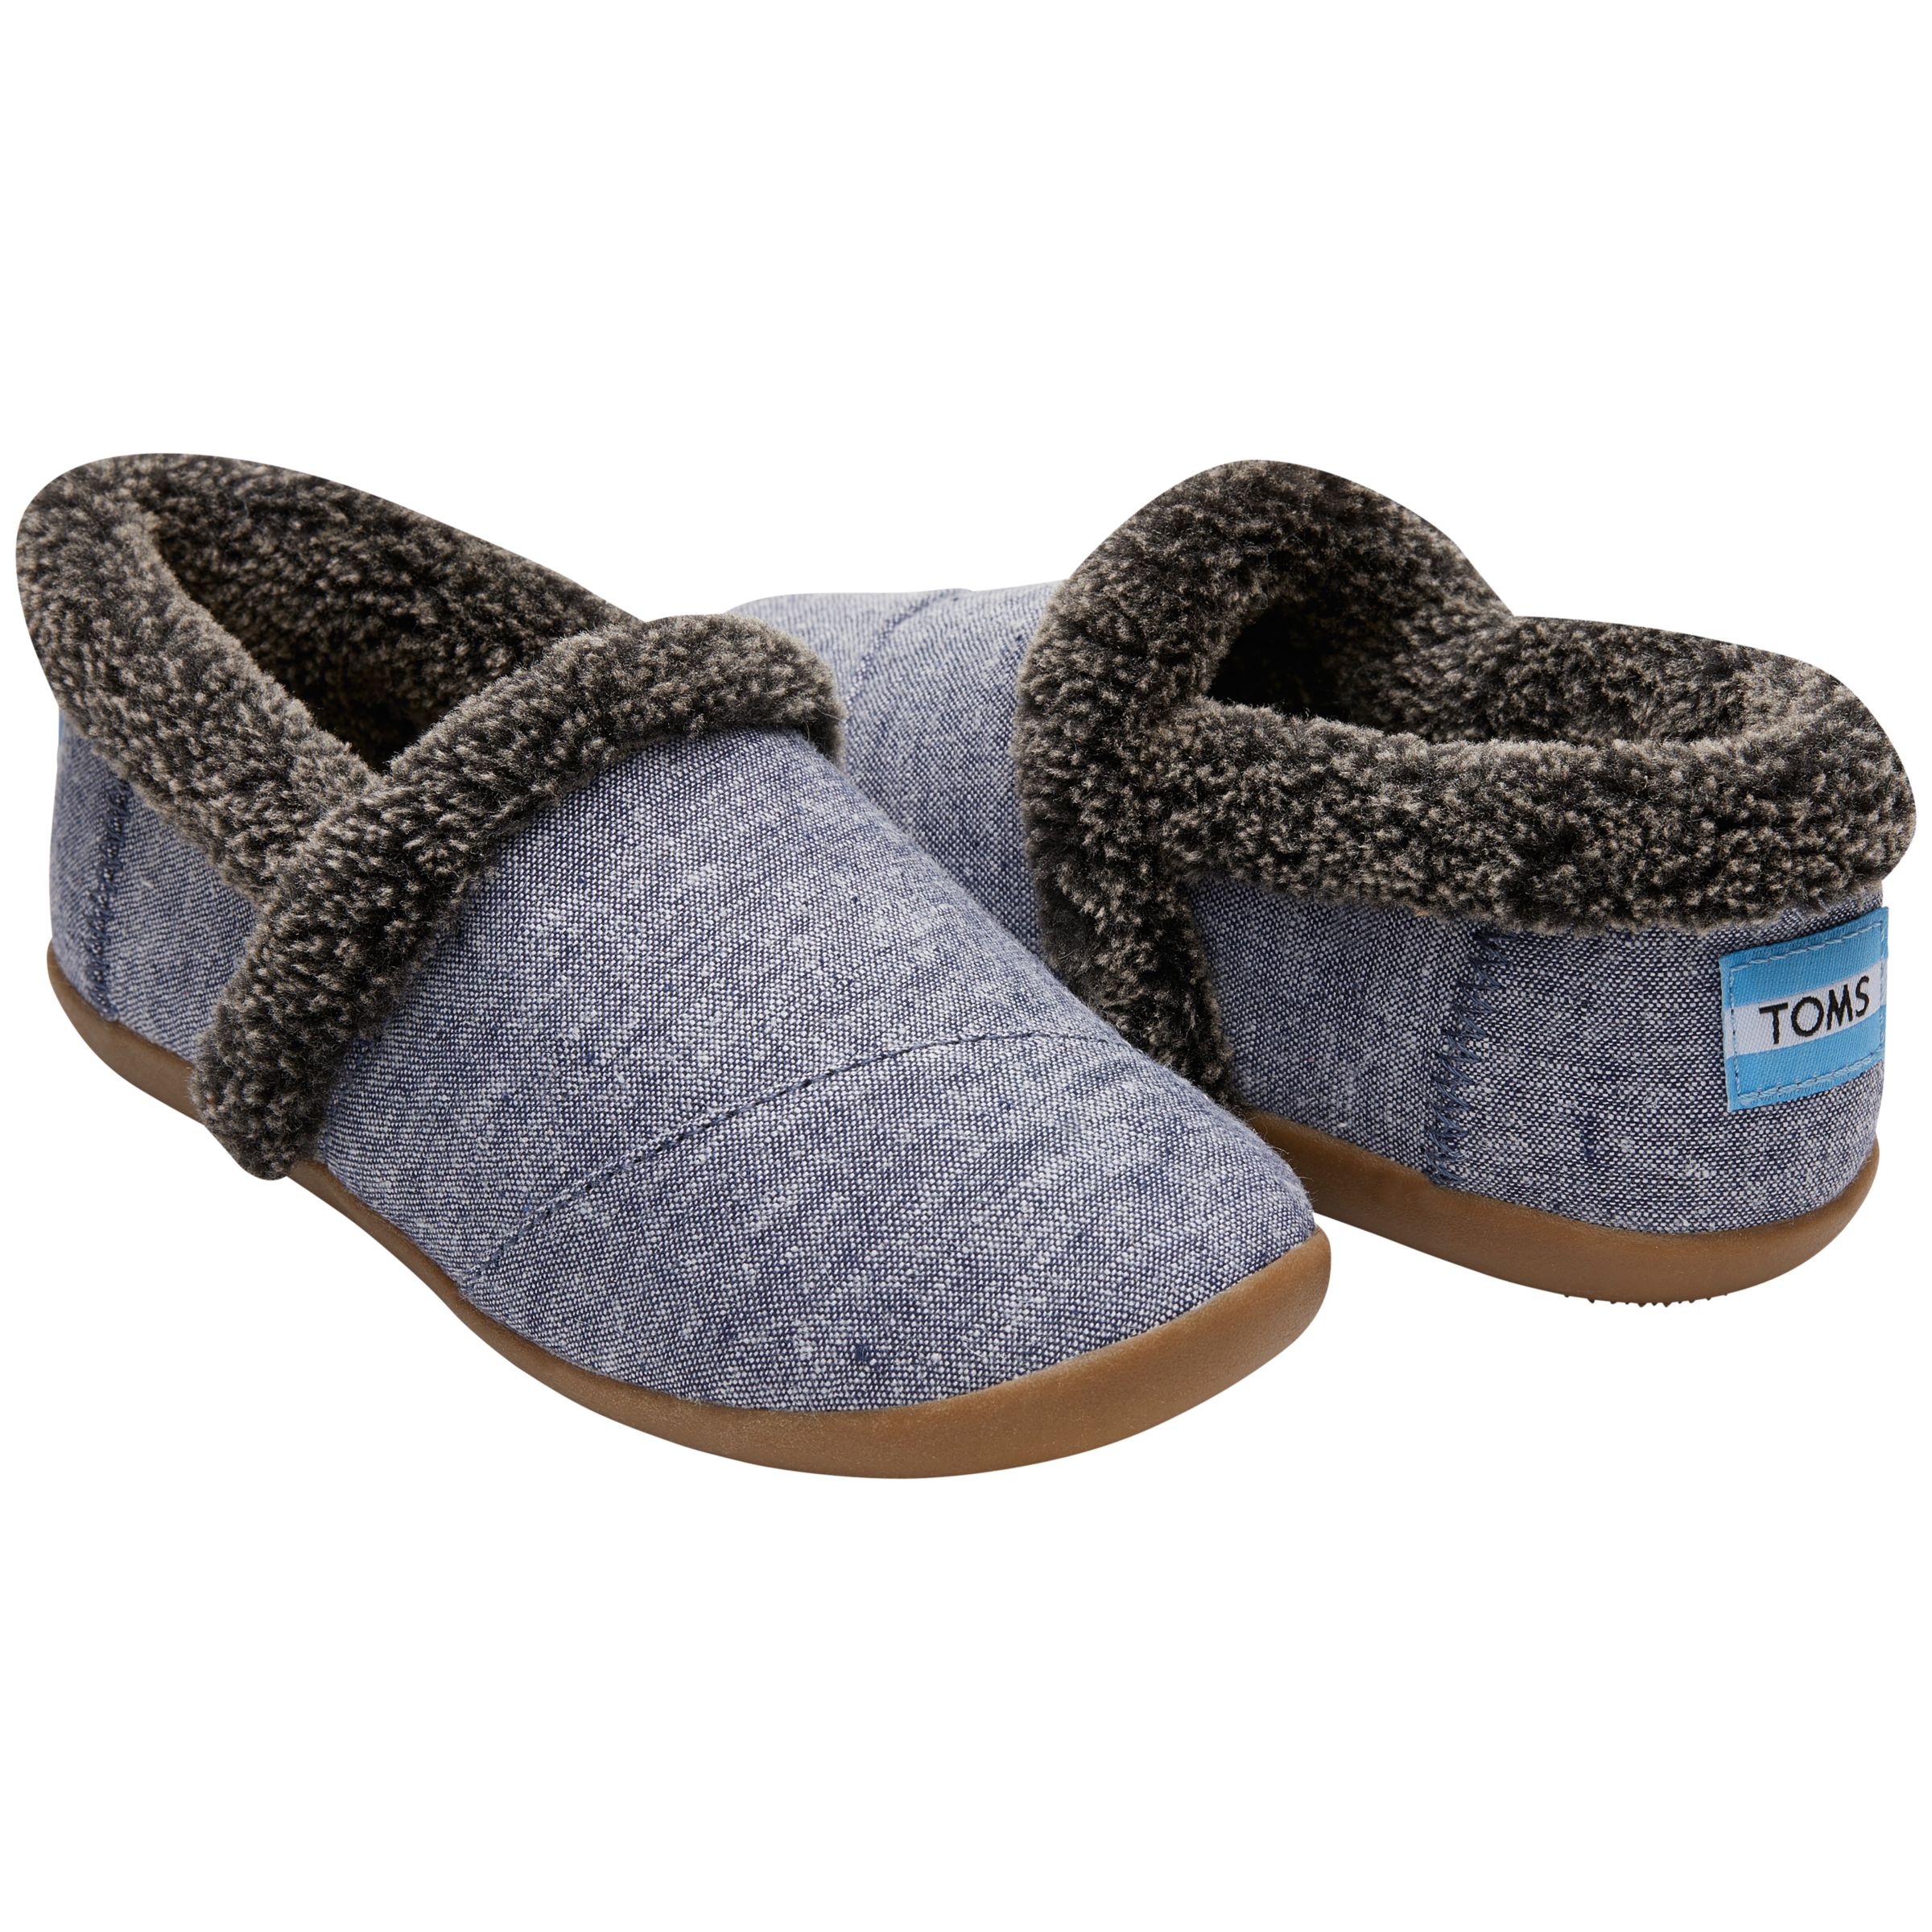 TOMS House Slippers, Chambray, 7 Jnr